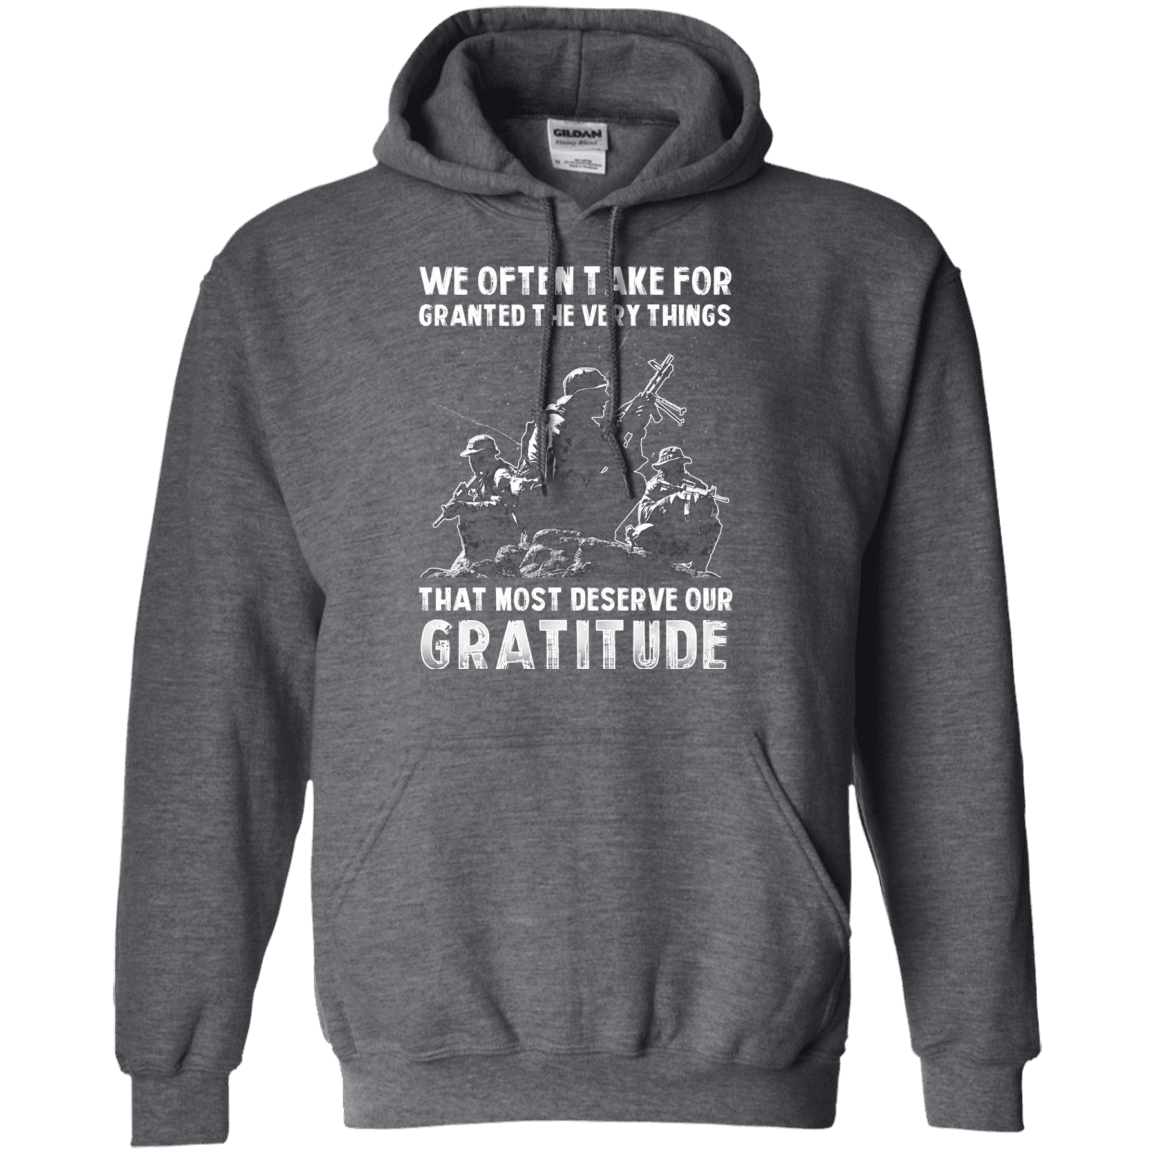 Military T-Shirt "We Often Take For Granted The Very Things"-TShirt-General-Veterans Nation